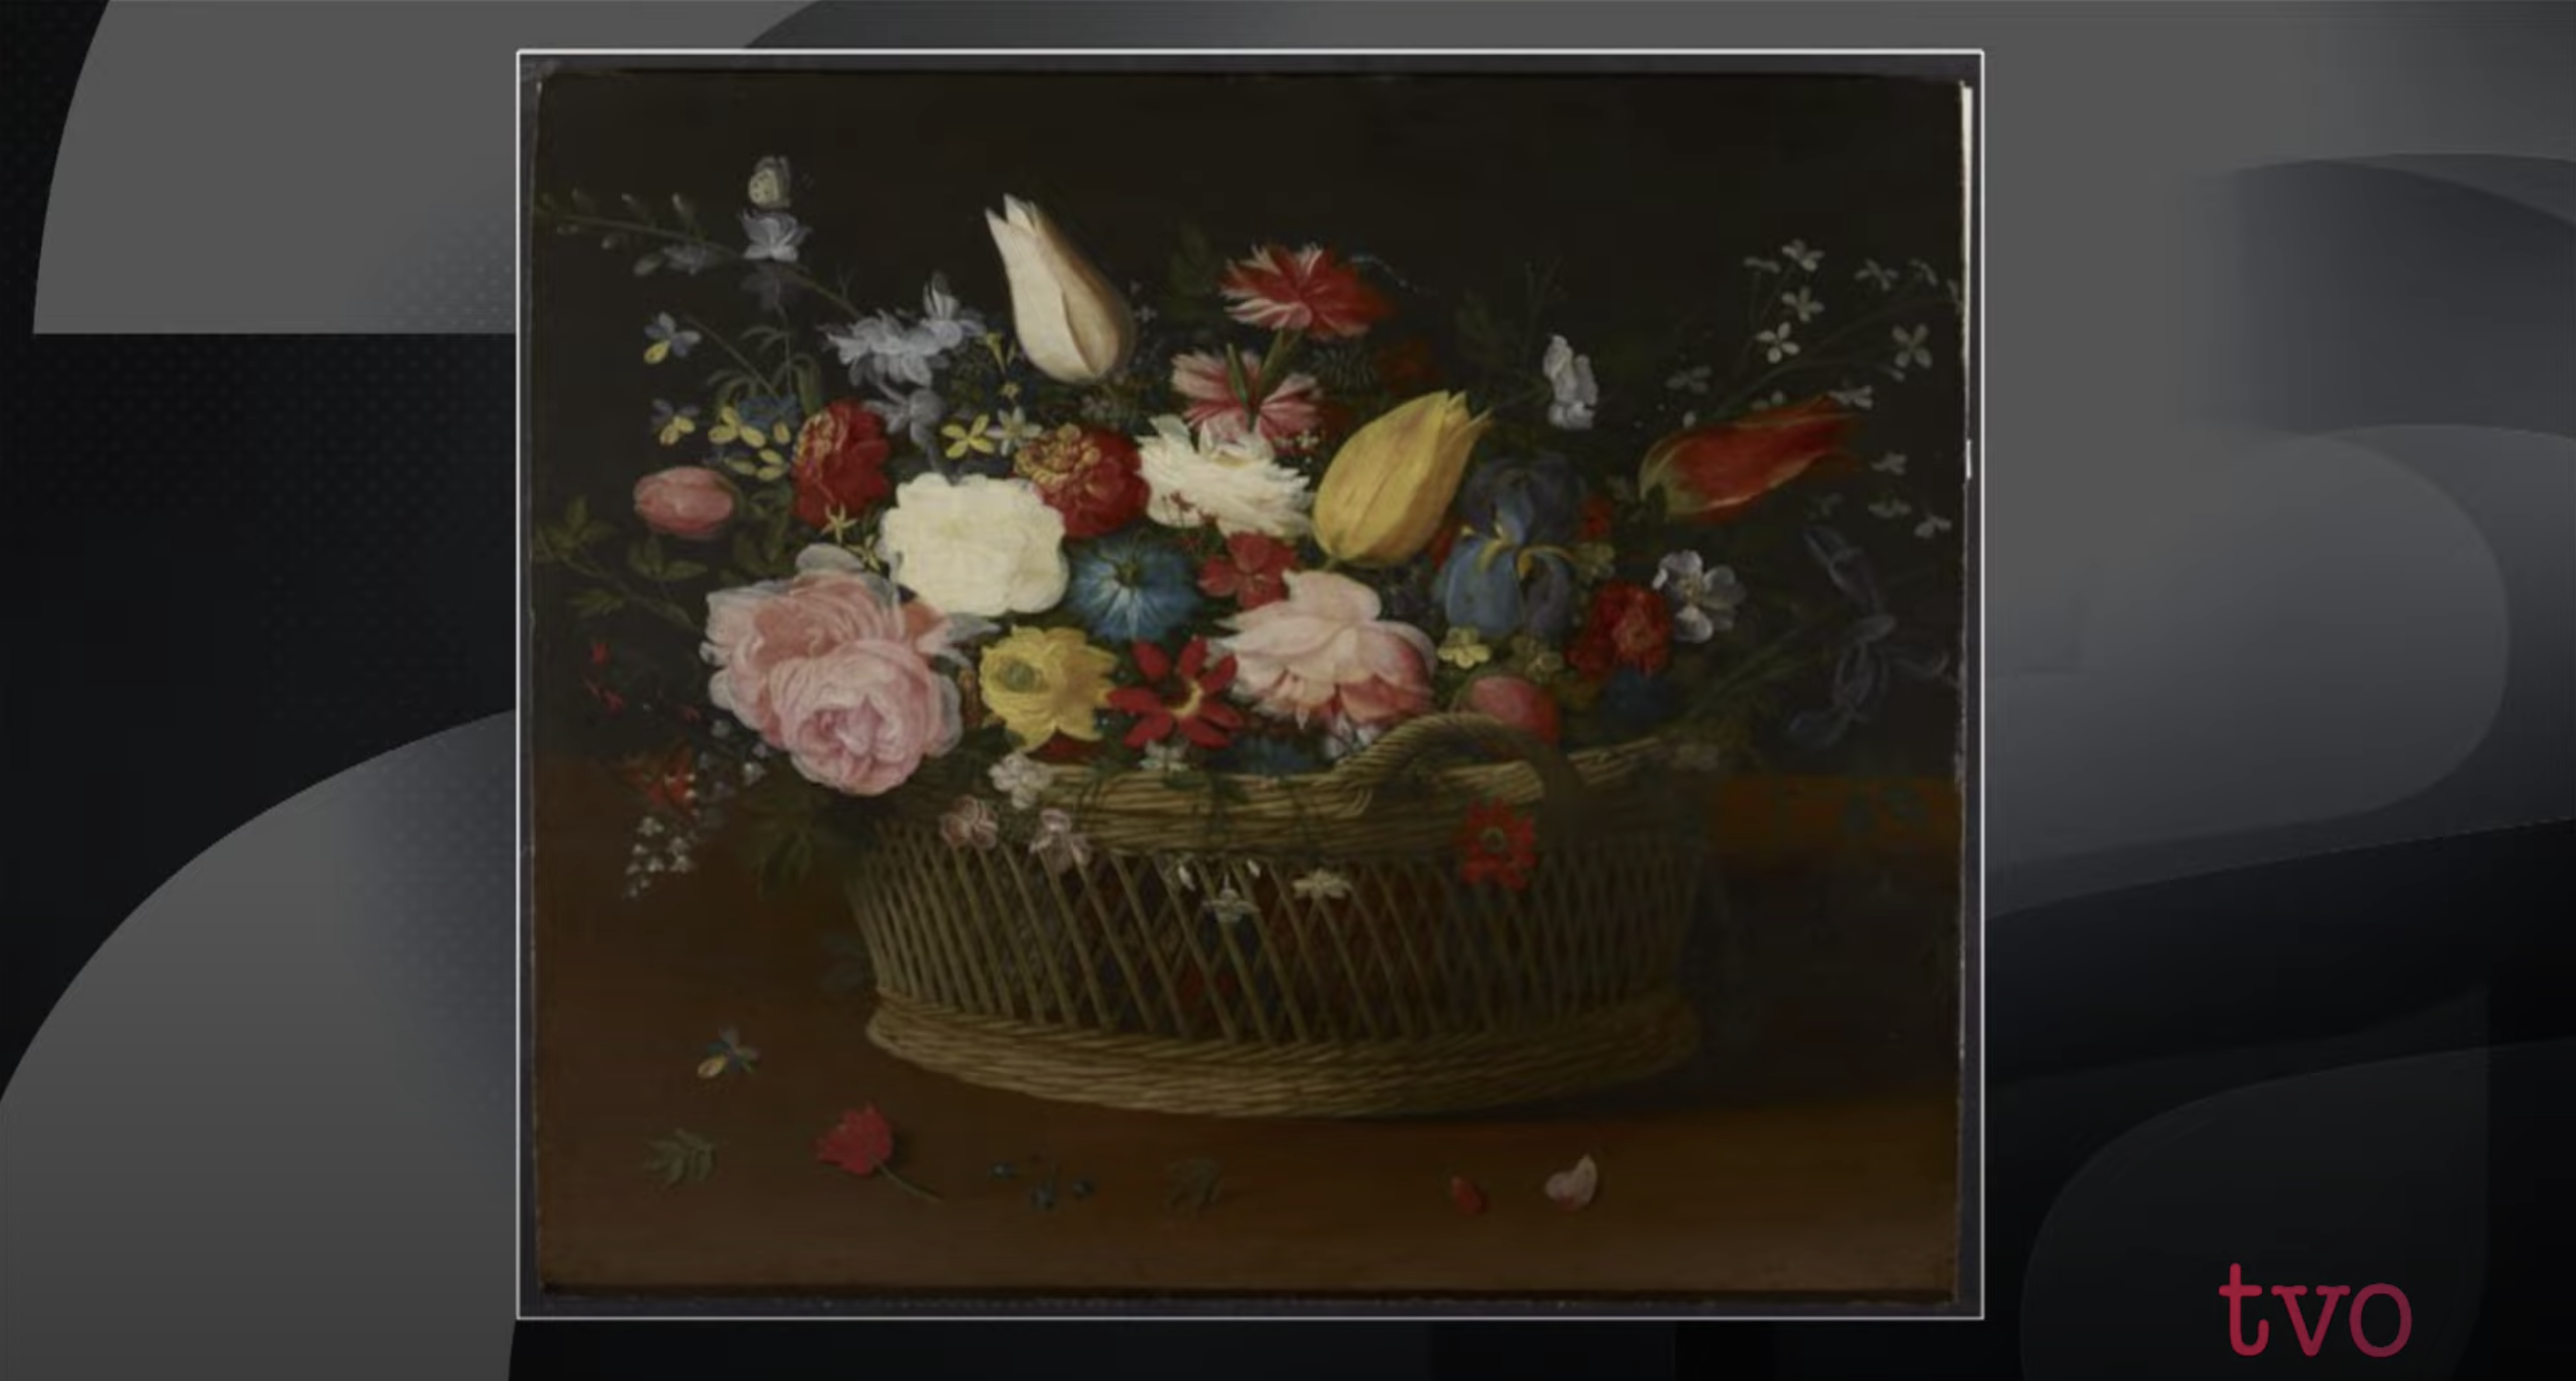 Jan van Kessel's painting Still Life with Floweras being shown on CBC's The Agenda during an interview with Sara Angel and Steve Paikin.